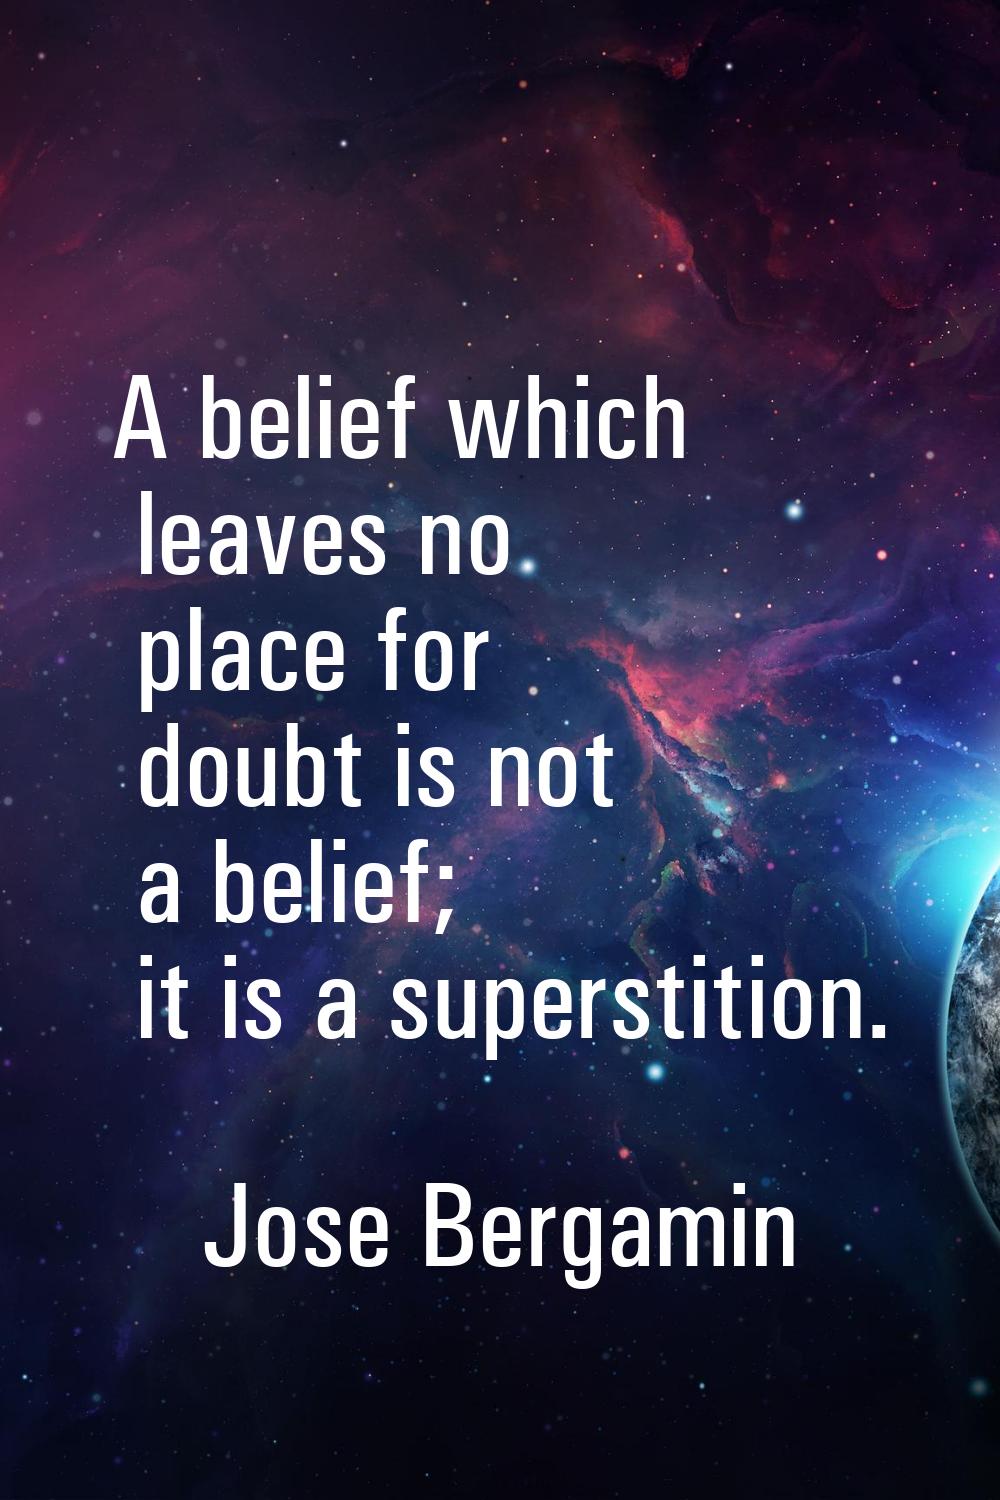 A belief which leaves no place for doubt is not a belief; it is a superstition.